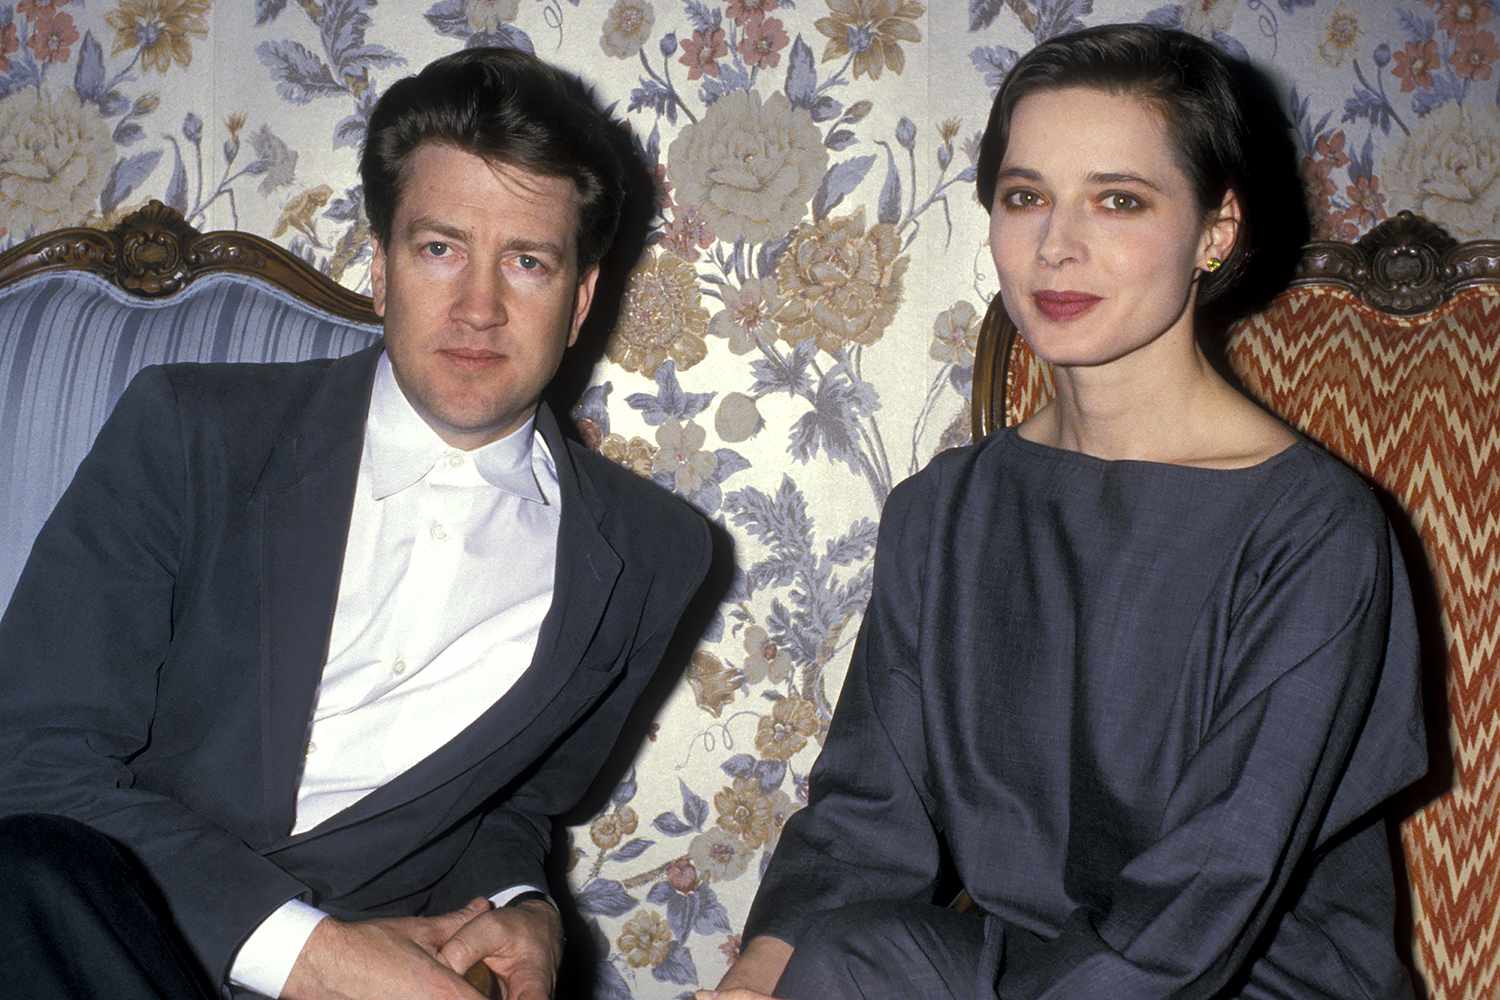 David Lynch and actress Isabella Rossellini attend ShoWest Convention on February 24, 1988 at Bally's Hotel and Casino in Las Vegas, Nevada.